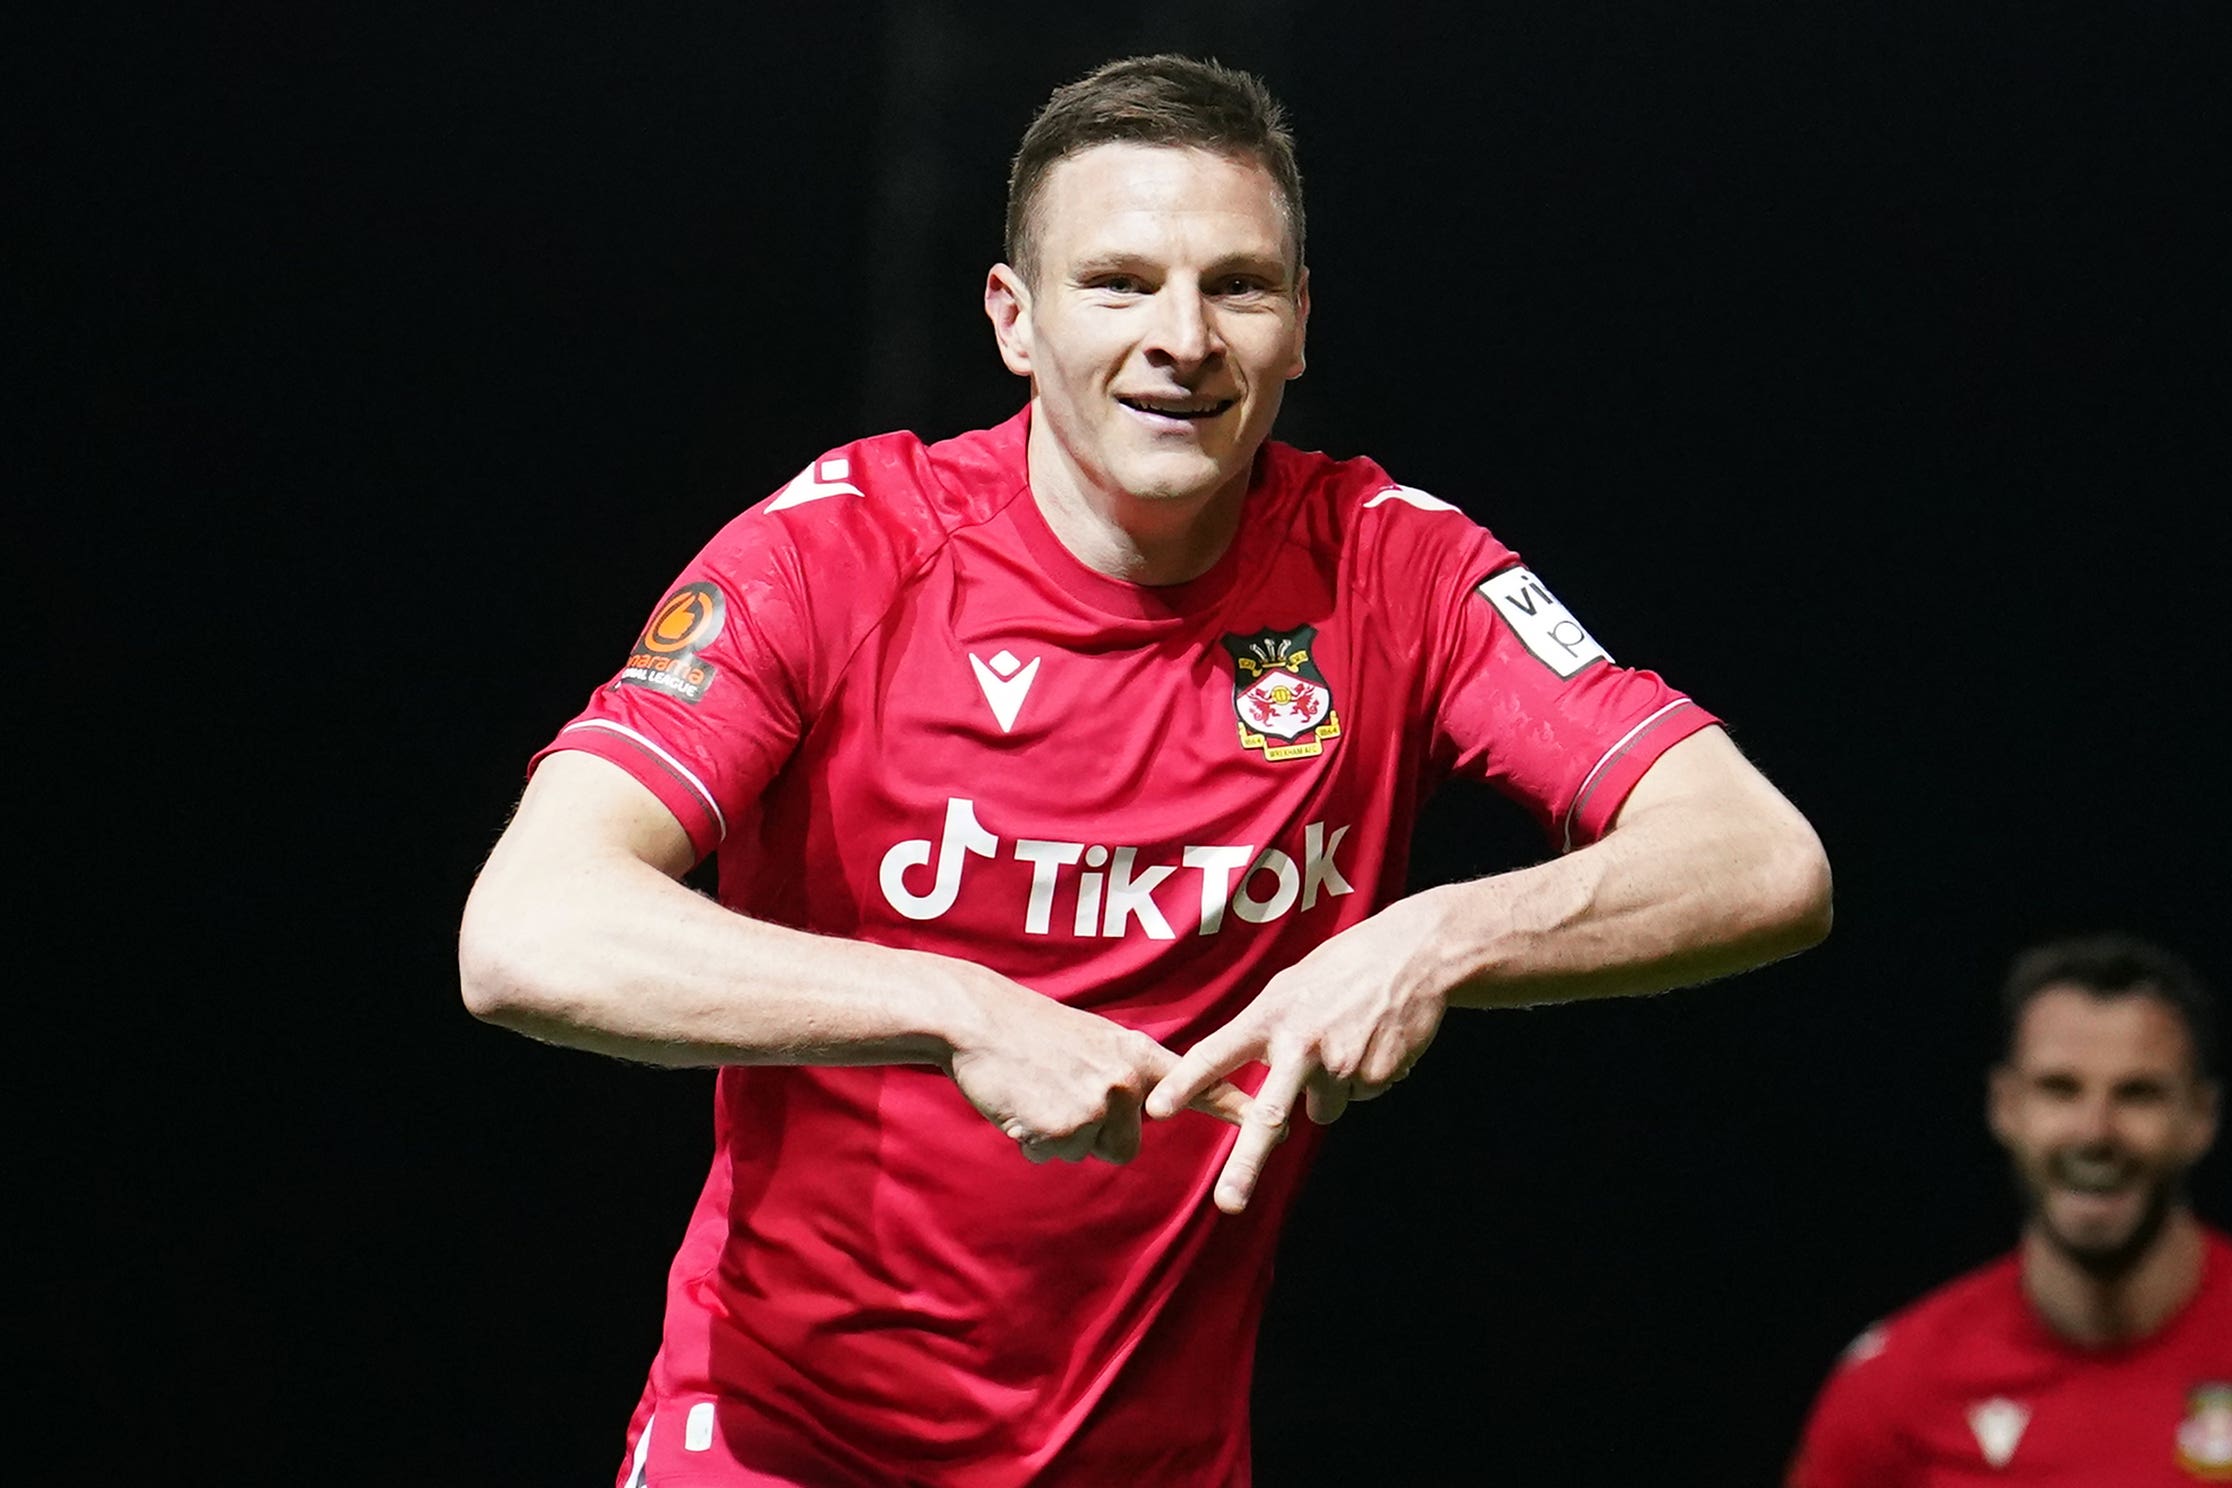 Wrexham striker Paul Mullin to convalesce at co-owner Rob McElhenney's home  | The Independent